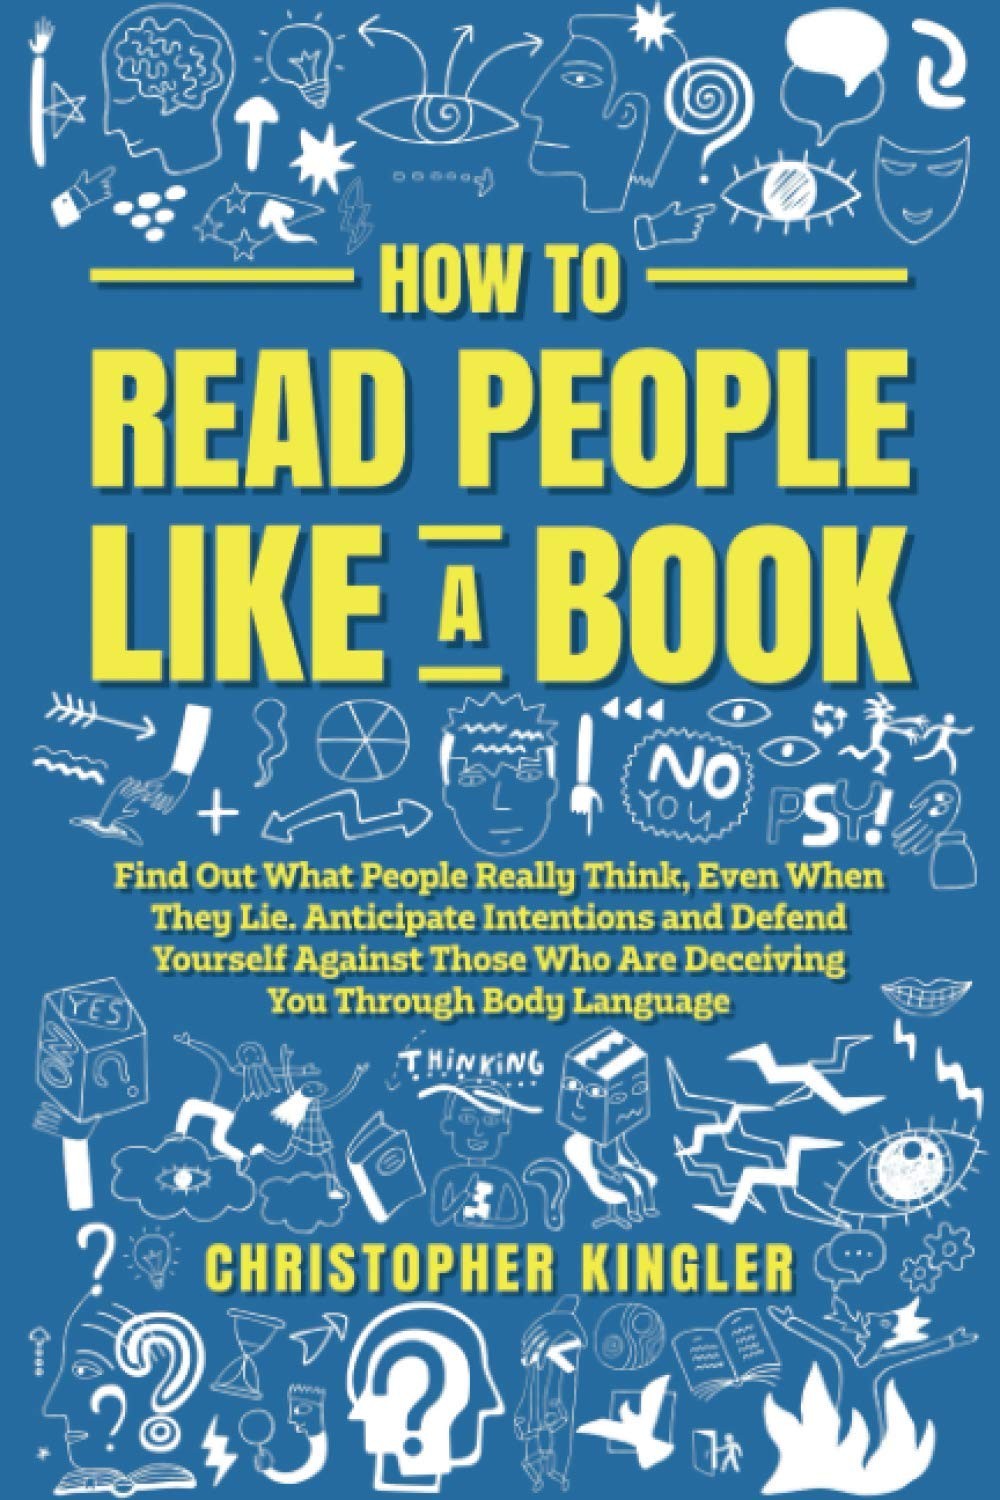 How to Read People Like a Book: Find Out What People Really Think, Even When They Lie. Anticipate Intentions and Defend Yourself Against Those Who Are Deceiving You Through Body Language.